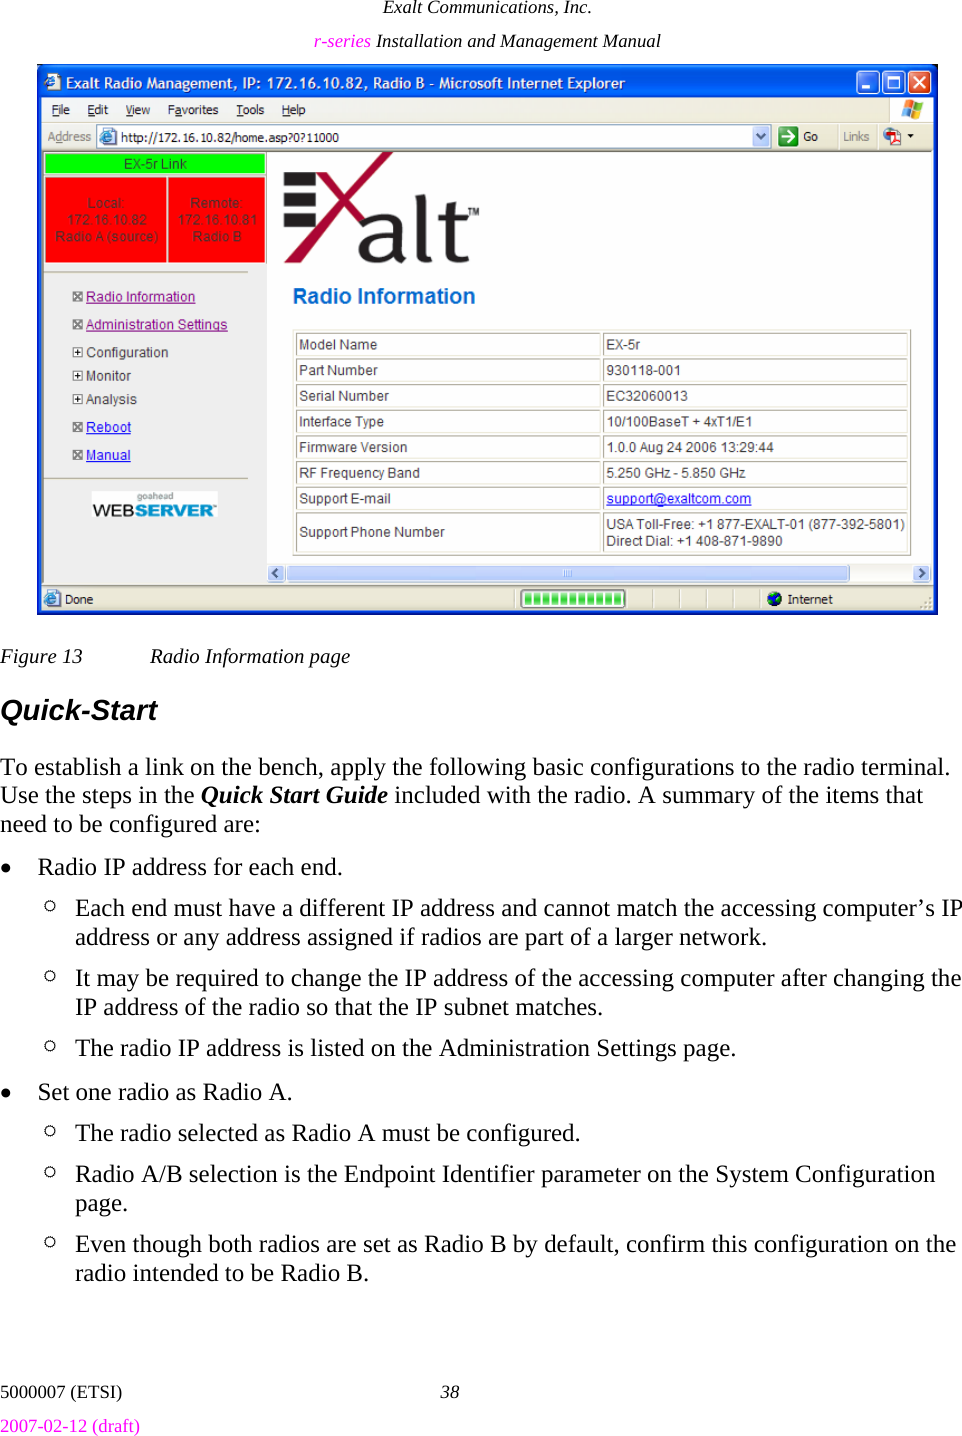 Exalt Communications, Inc. r-series Installation and Management Manual 5000007 (ETSI)  38 2007-02-12 (draft)  Figure 13  Radio Information page Quick-Start To establish a link on the bench, apply the following basic configurations to the radio terminal. Use the steps in the Quick Start Guide included with the radio. A summary of the items that need to be configured are: • Radio IP address for each end.  ¶ Each end must have a different IP address and cannot match the accessing computer’s IP address or any address assigned if radios are part of a larger network. ¶ It may be required to change the IP address of the accessing computer after changing the IP address of the radio so that the IP subnet matches. ¶ The radio IP address is listed on the Administration Settings page. • Set one radio as Radio A. ¶ The radio selected as Radio A must be configured. ¶ Radio A/B selection is the Endpoint Identifier parameter on the System Configuration page. ¶ Even though both radios are set as Radio B by default, confirm this configuration on the radio intended to be Radio B. 